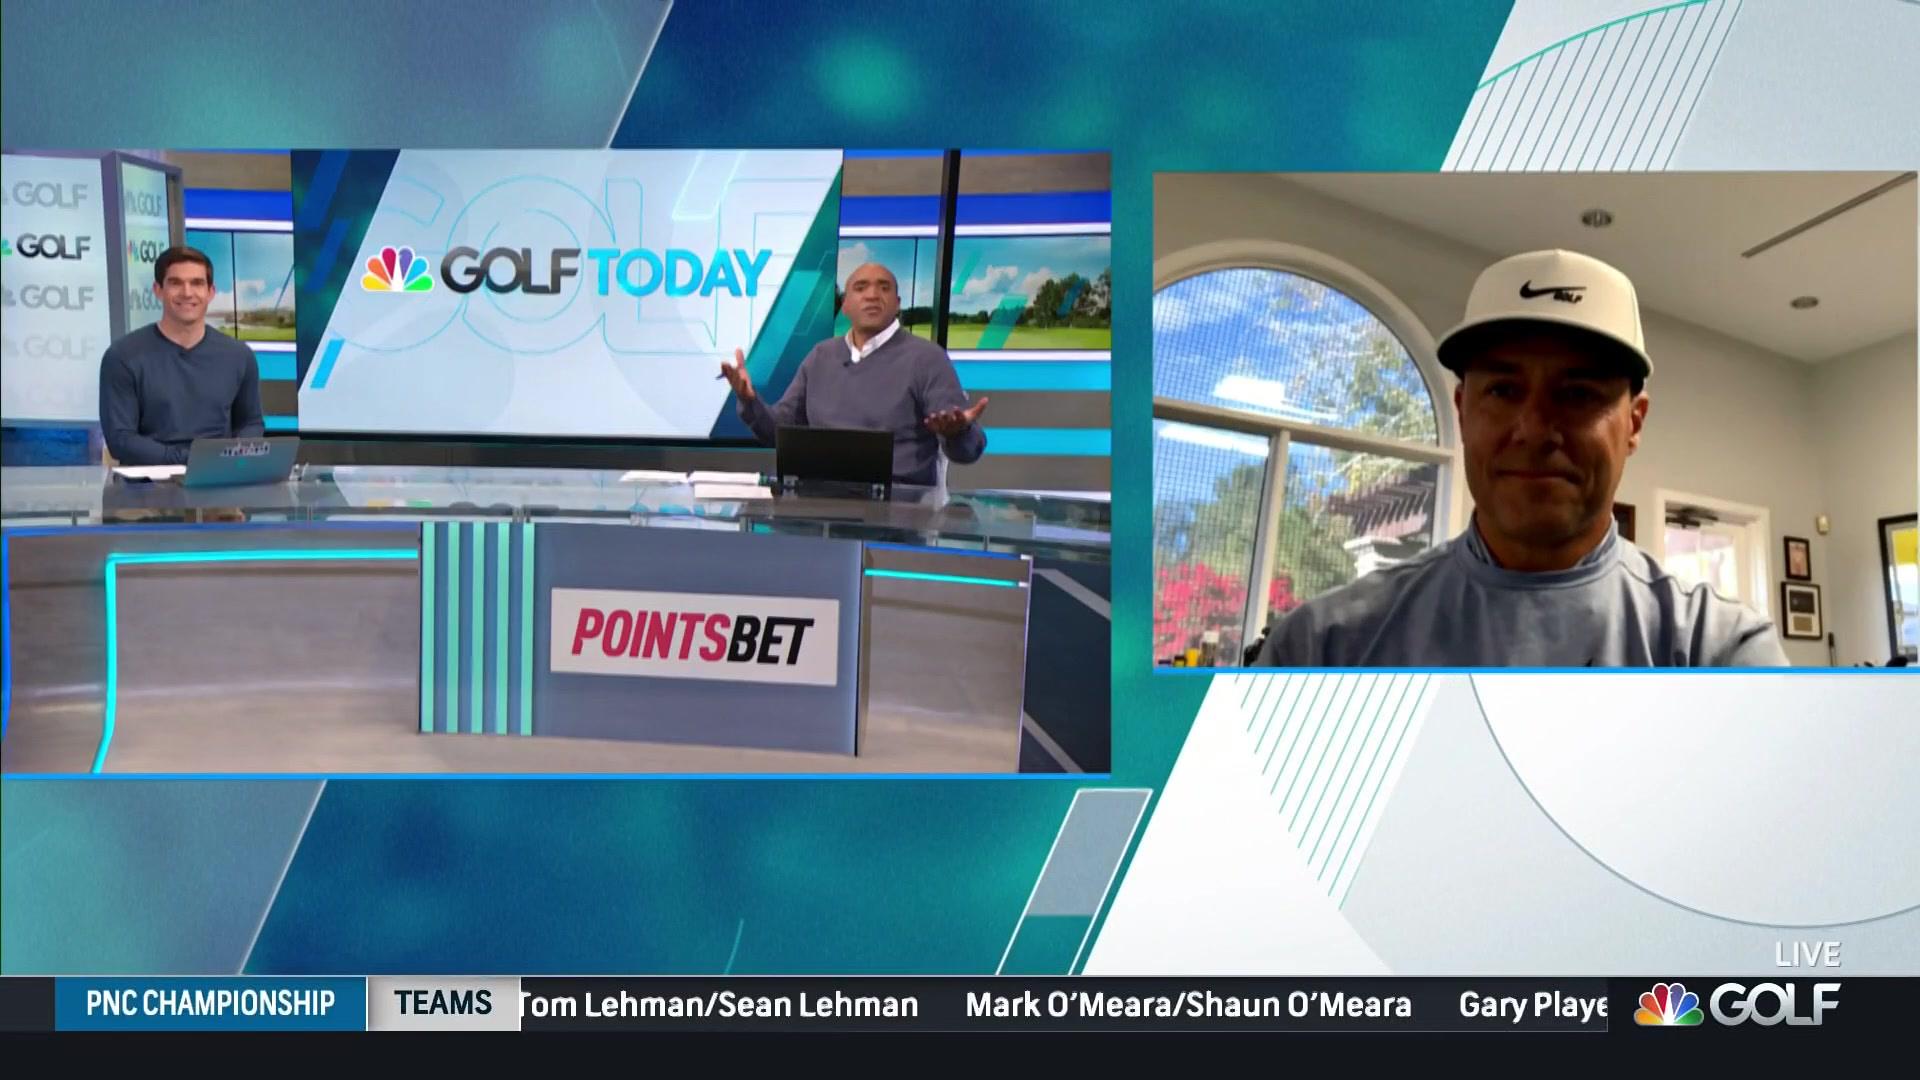 Golf Today on GolfPass Golf Today Segments Martin Chuck on how to improve golf skills from the comfort of your home